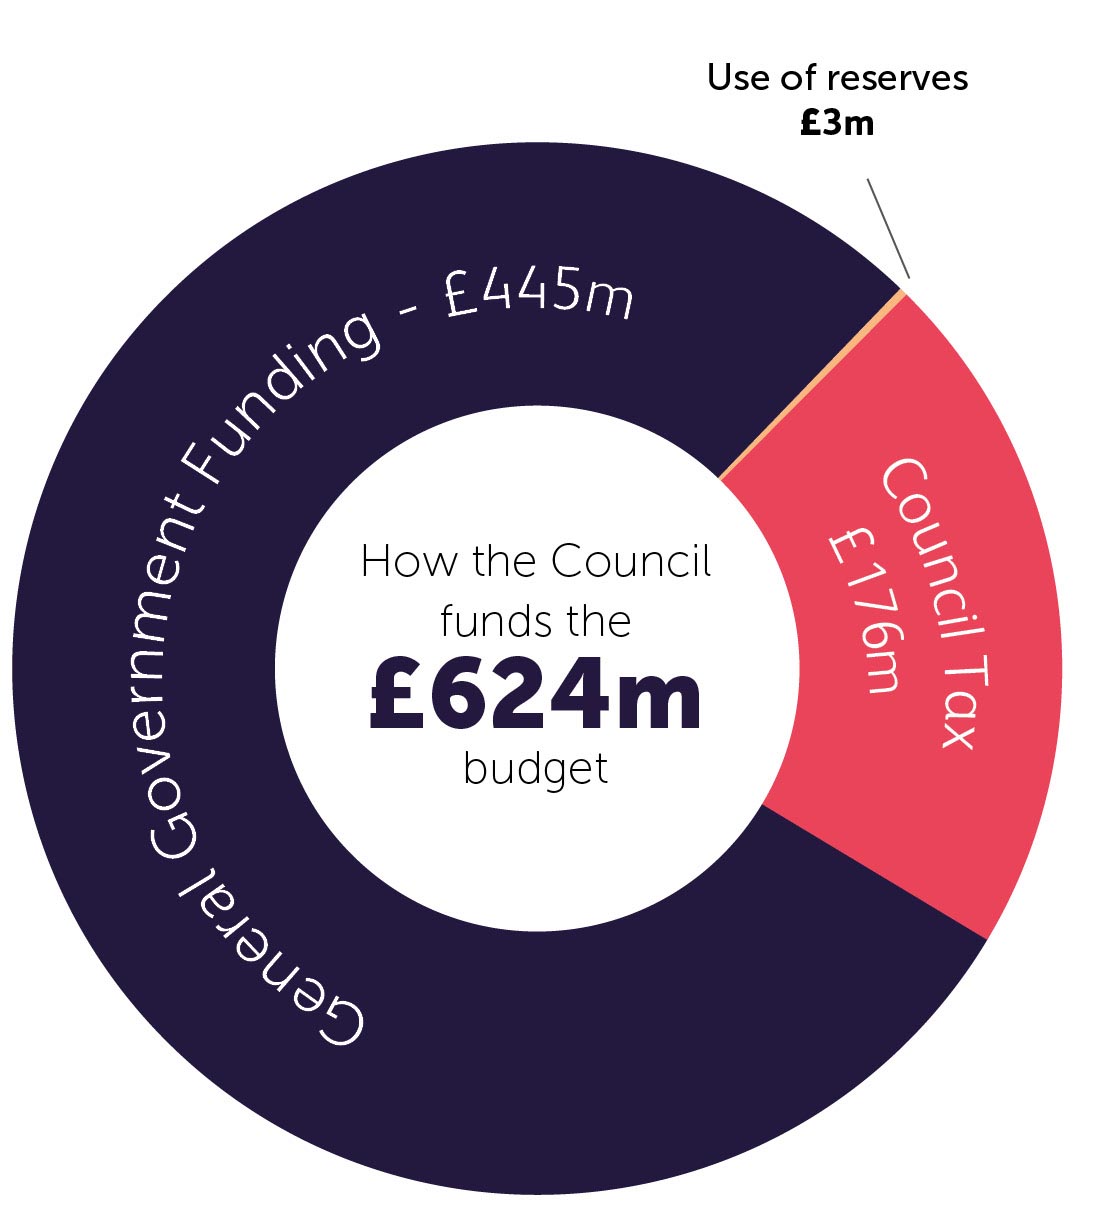 Chart showing how the council funds the £624m budget